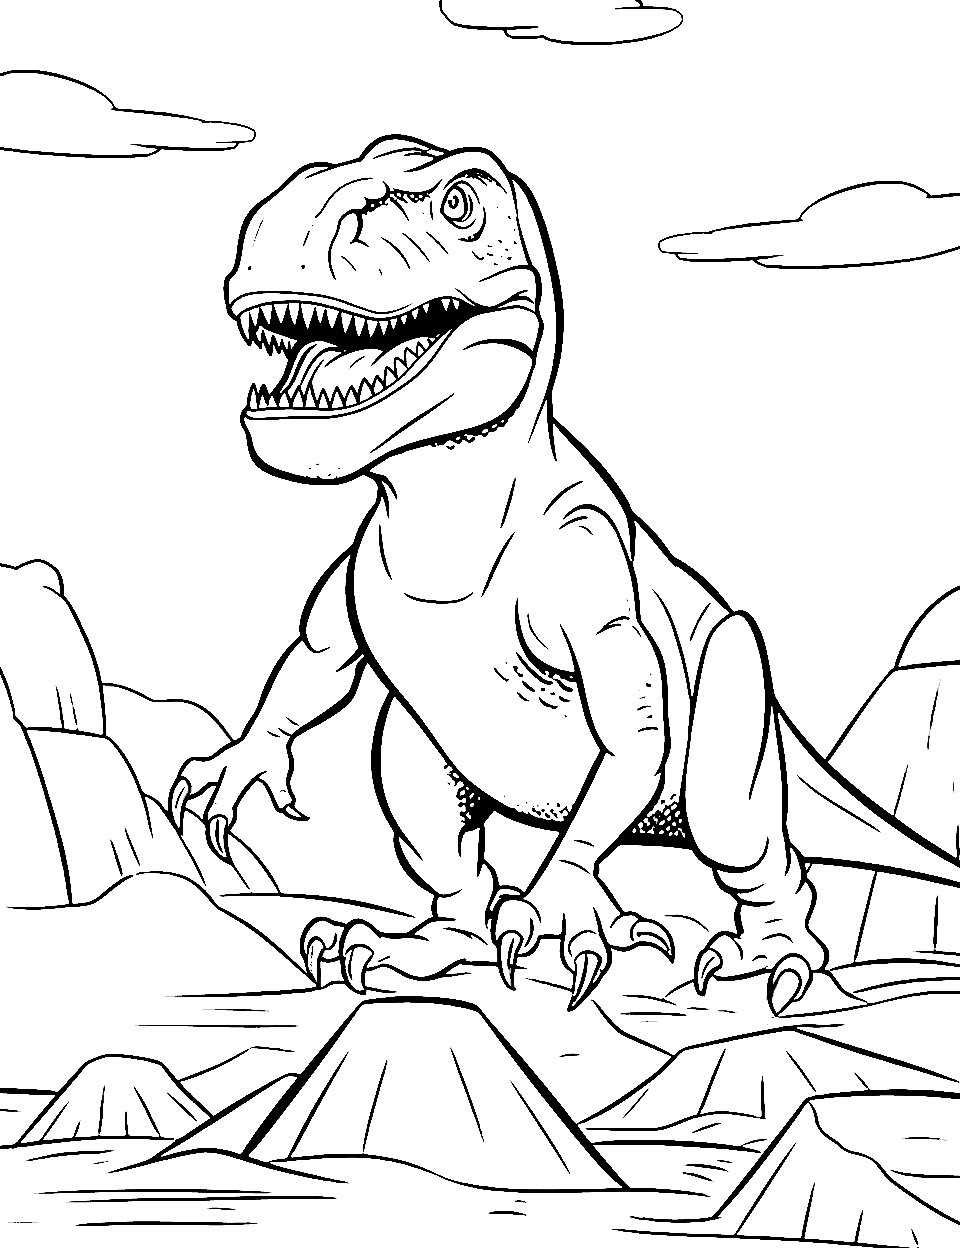 Mountain T Rex T-rex Coloring Page - A T-Rex roaming around in the mountains.